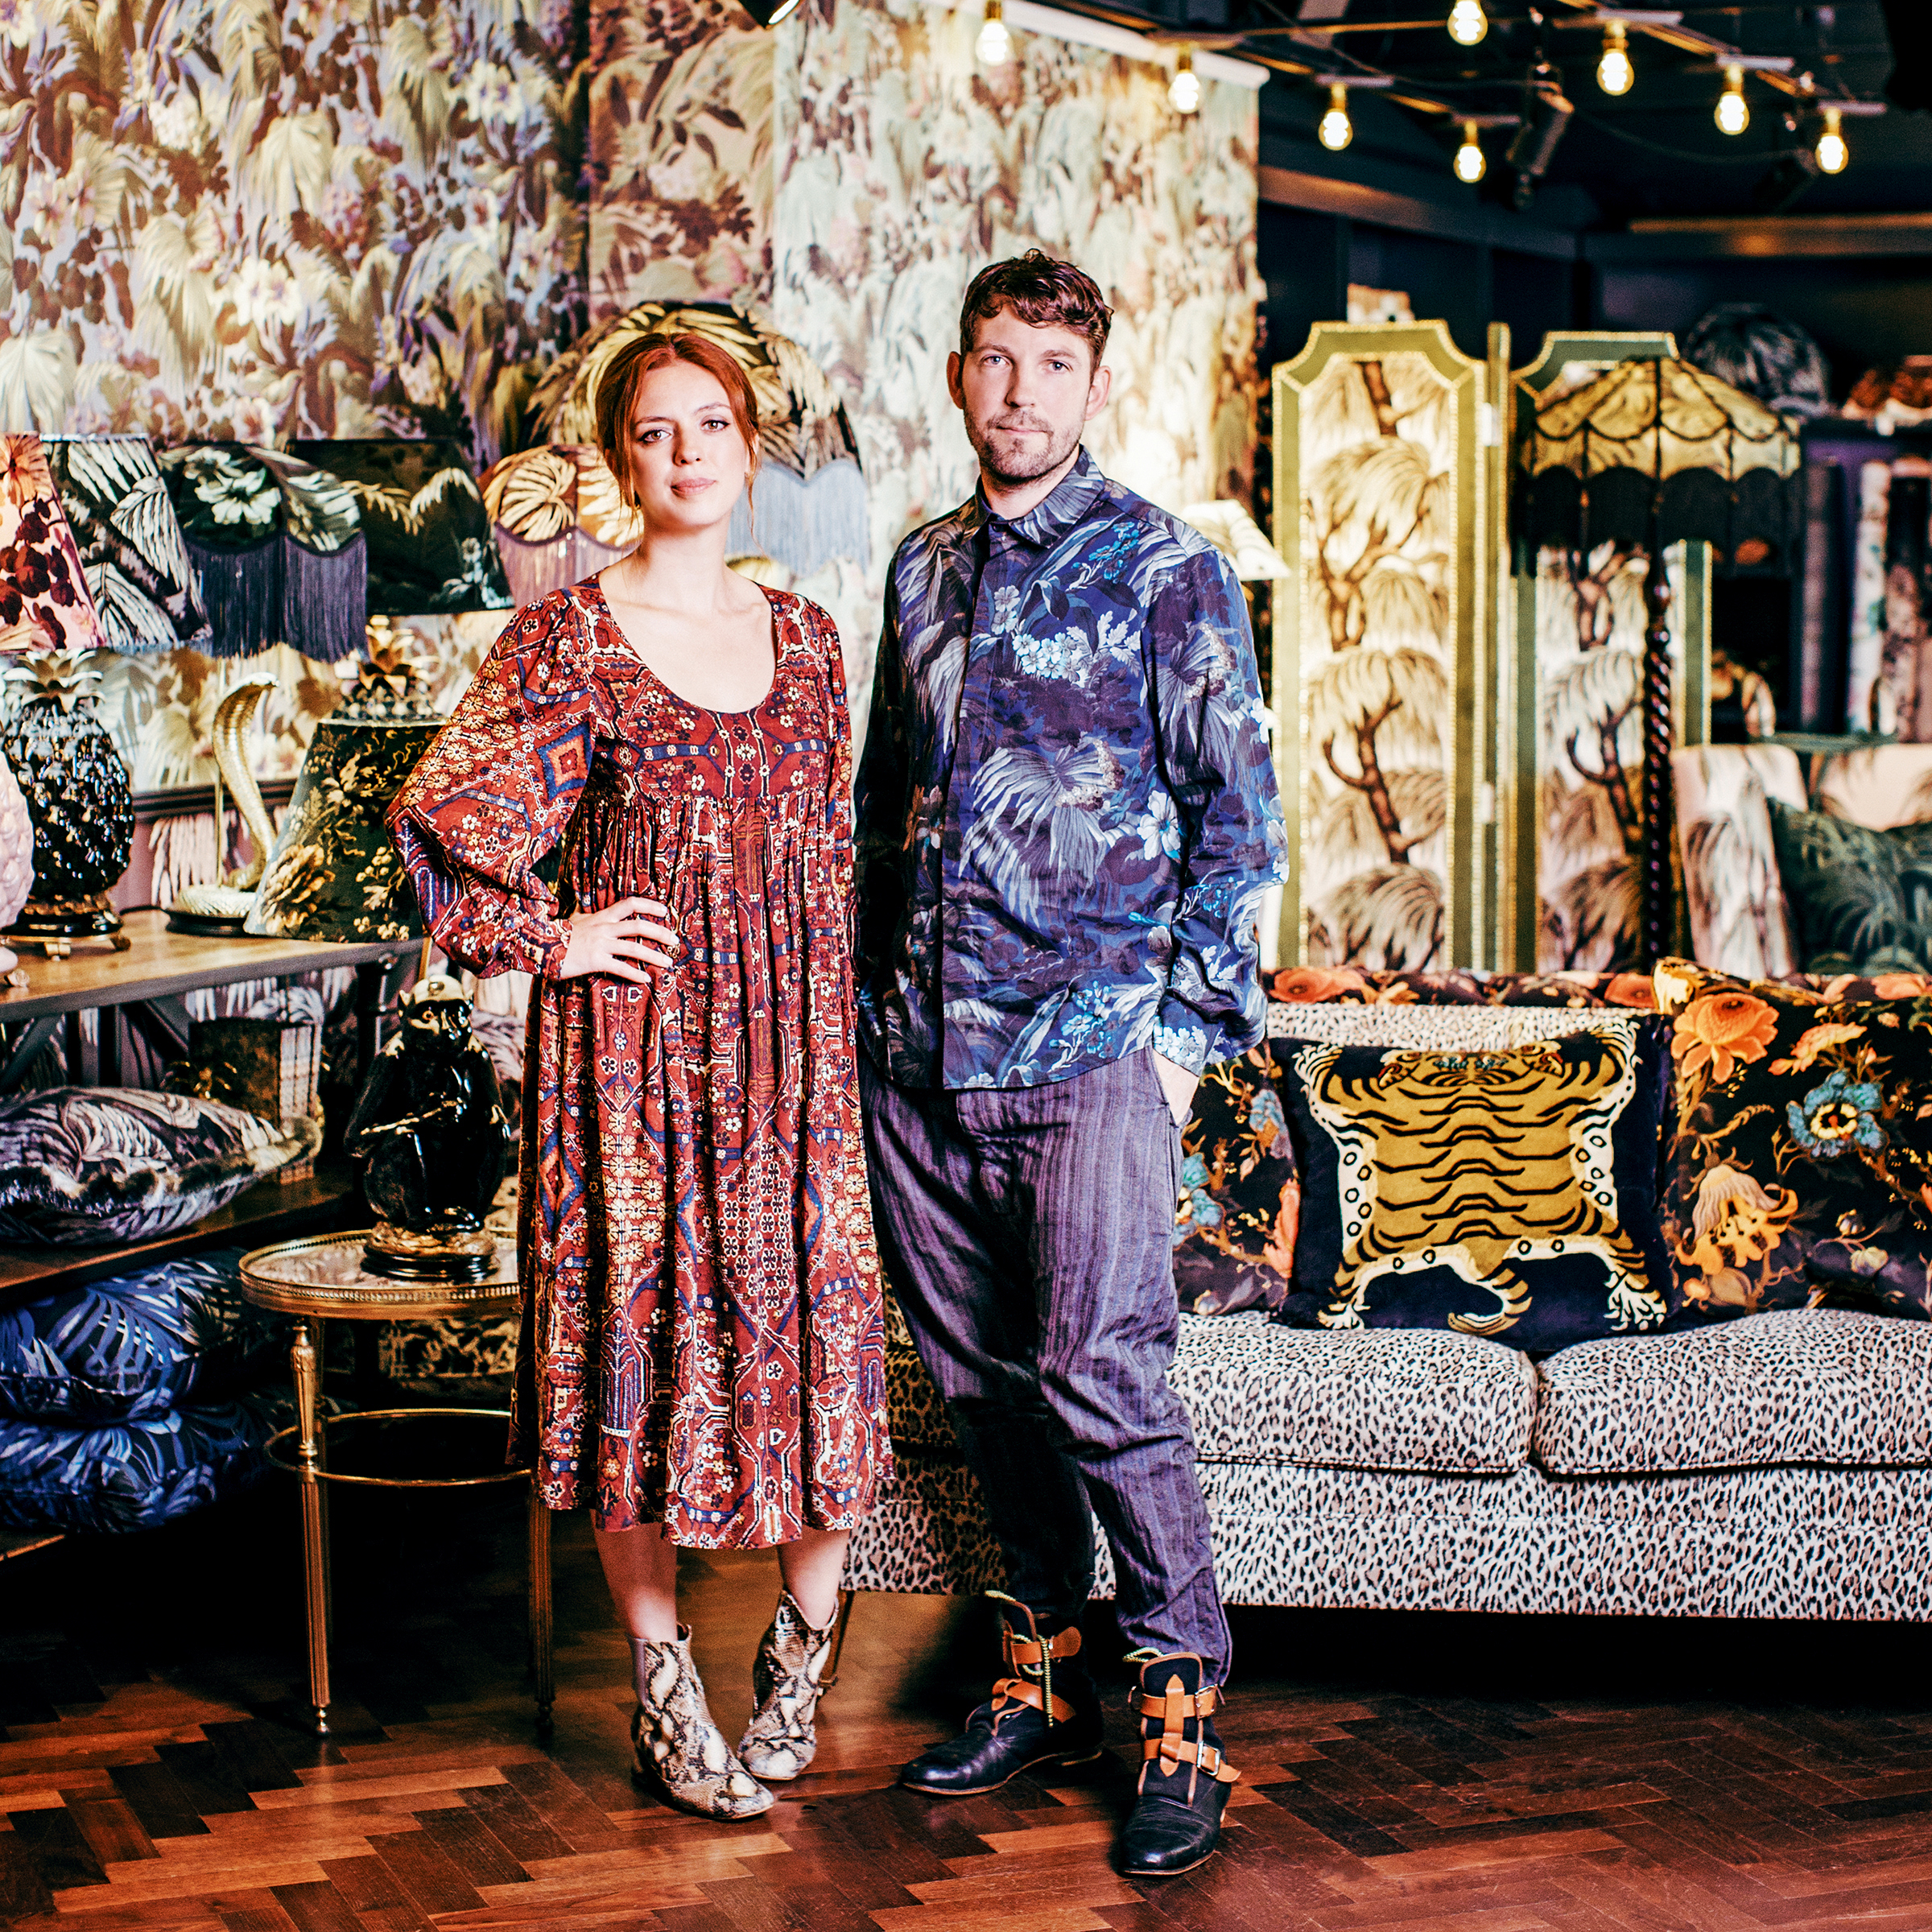 Frieda Gormley And Javvy M Royle Of House Of Hackney - Javvy M Royle And Frieda Gormley - HD Wallpaper 